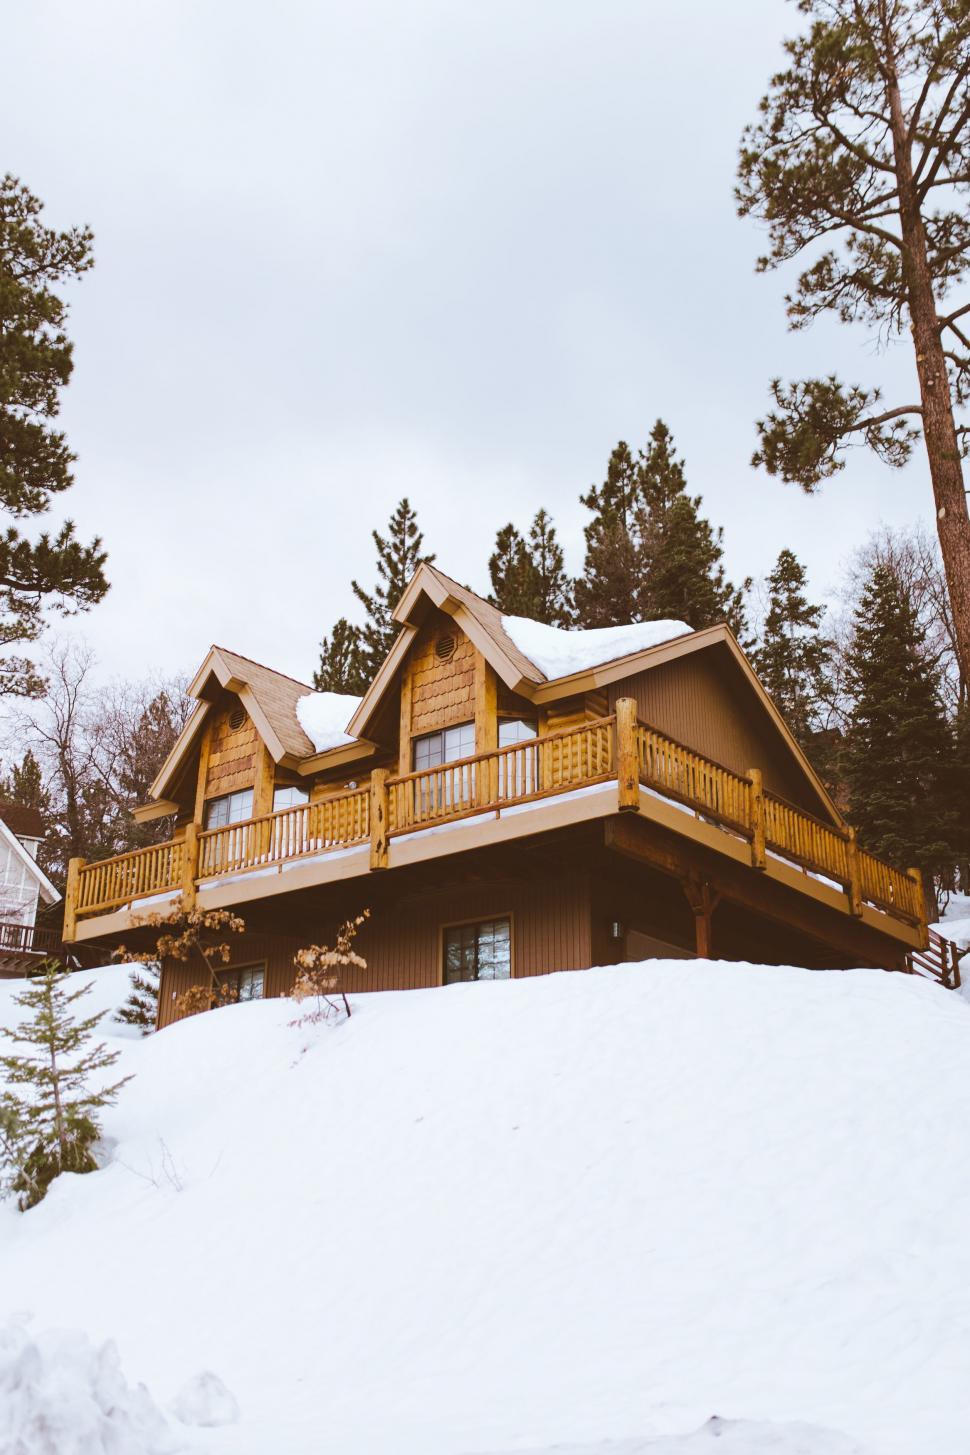 Free Image of Charming snowy cabin in a winter wonderland 